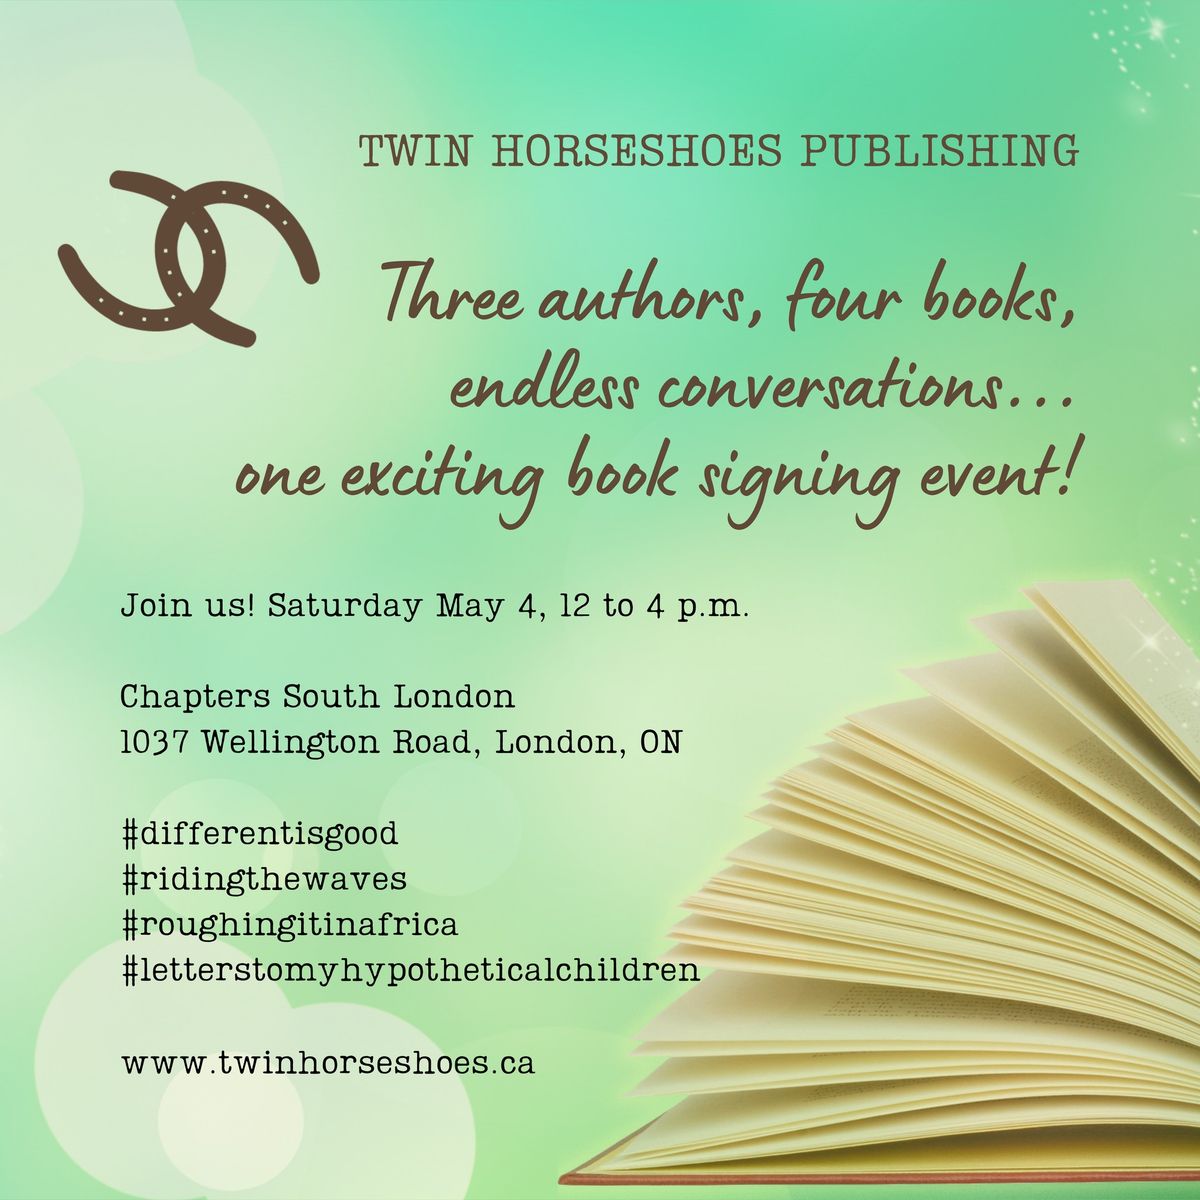 Twin Horseshoes Book Signing at Chapters South London